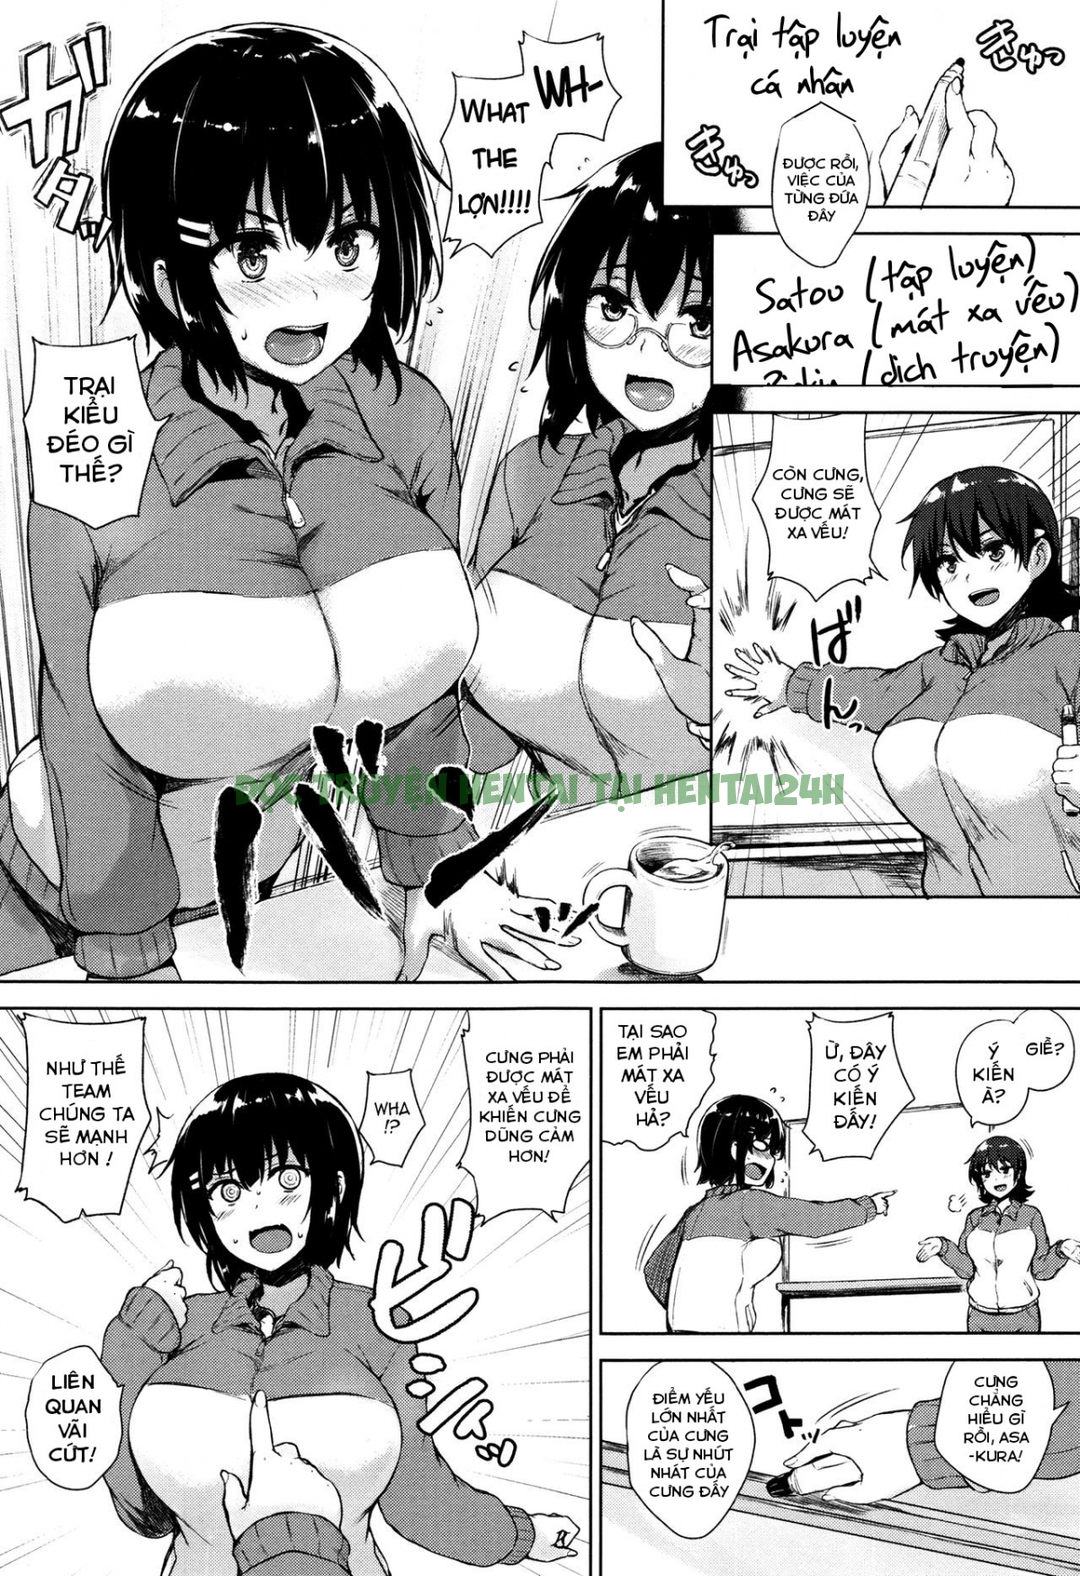 Xem ảnh Twin Ball Love Attack - Chapter 5 END - 2 - Hentai24h.Tv